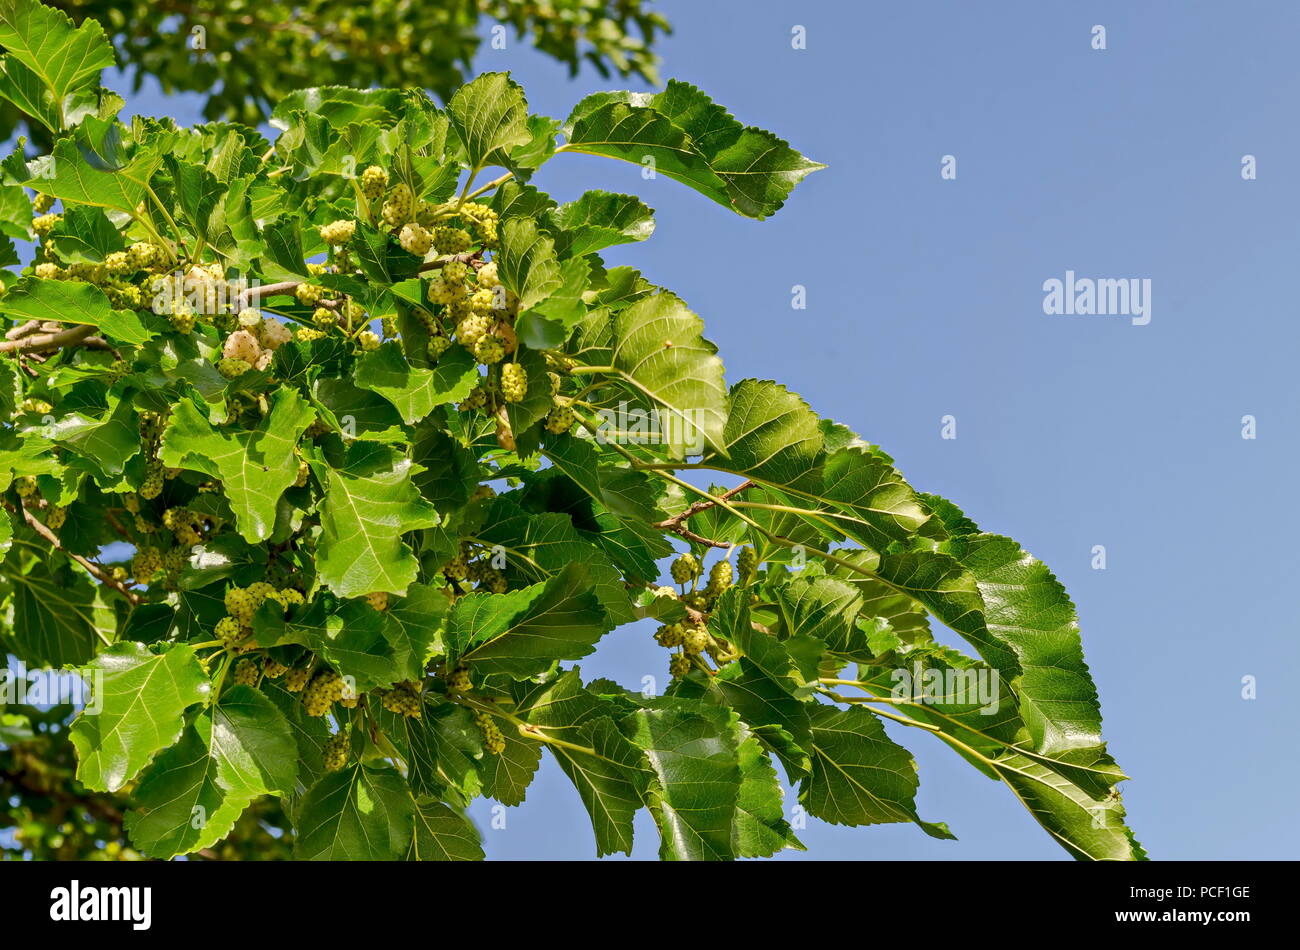 Branch with ripe and unripe fruits of White mulberry or Morus alba tree in  garden, district Drujba, Sofia, Bulgaria Stock Photo - Alamy